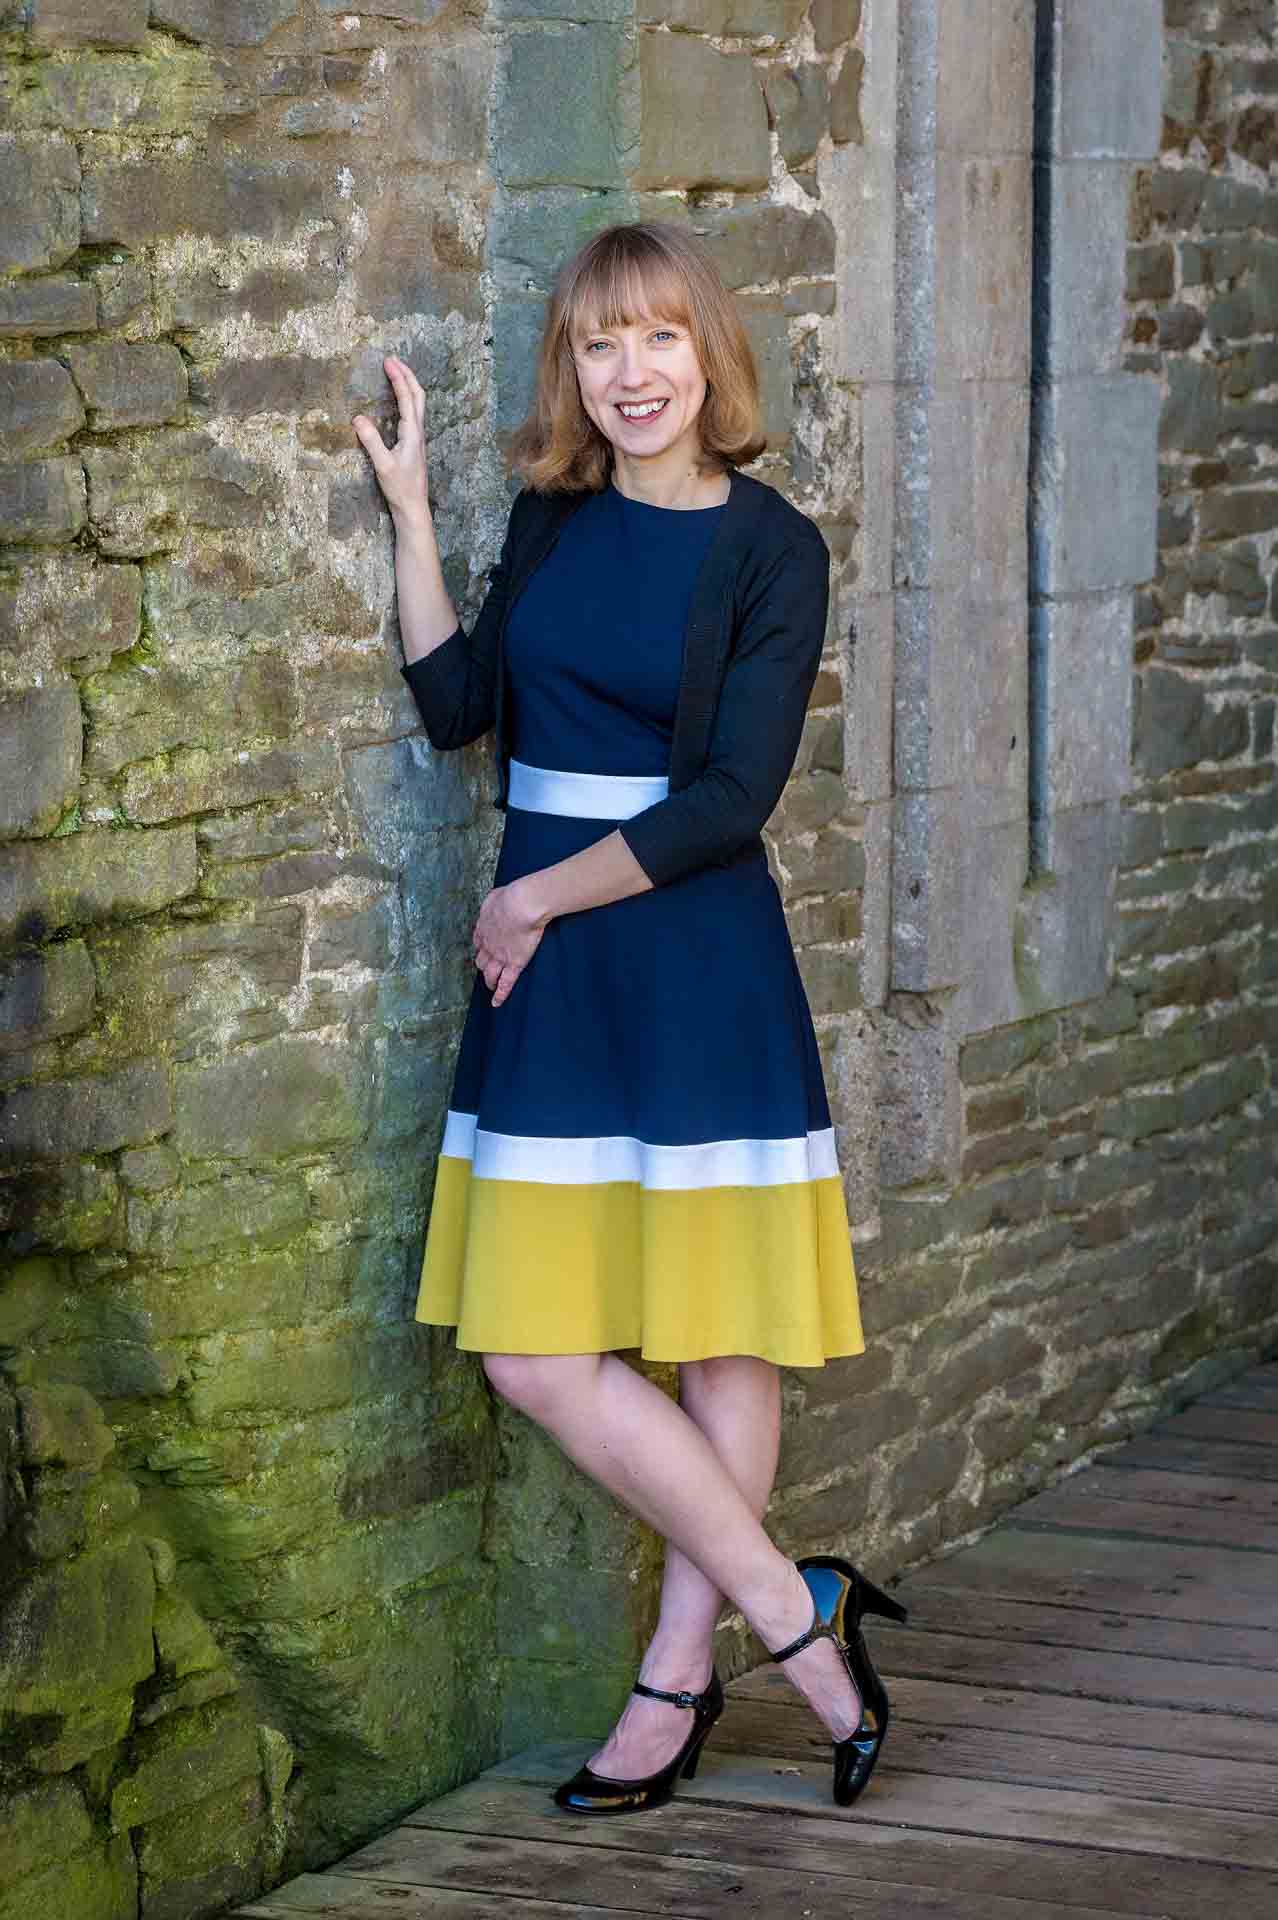 Lady posing against wall at Caerphilly Castle for dating profile